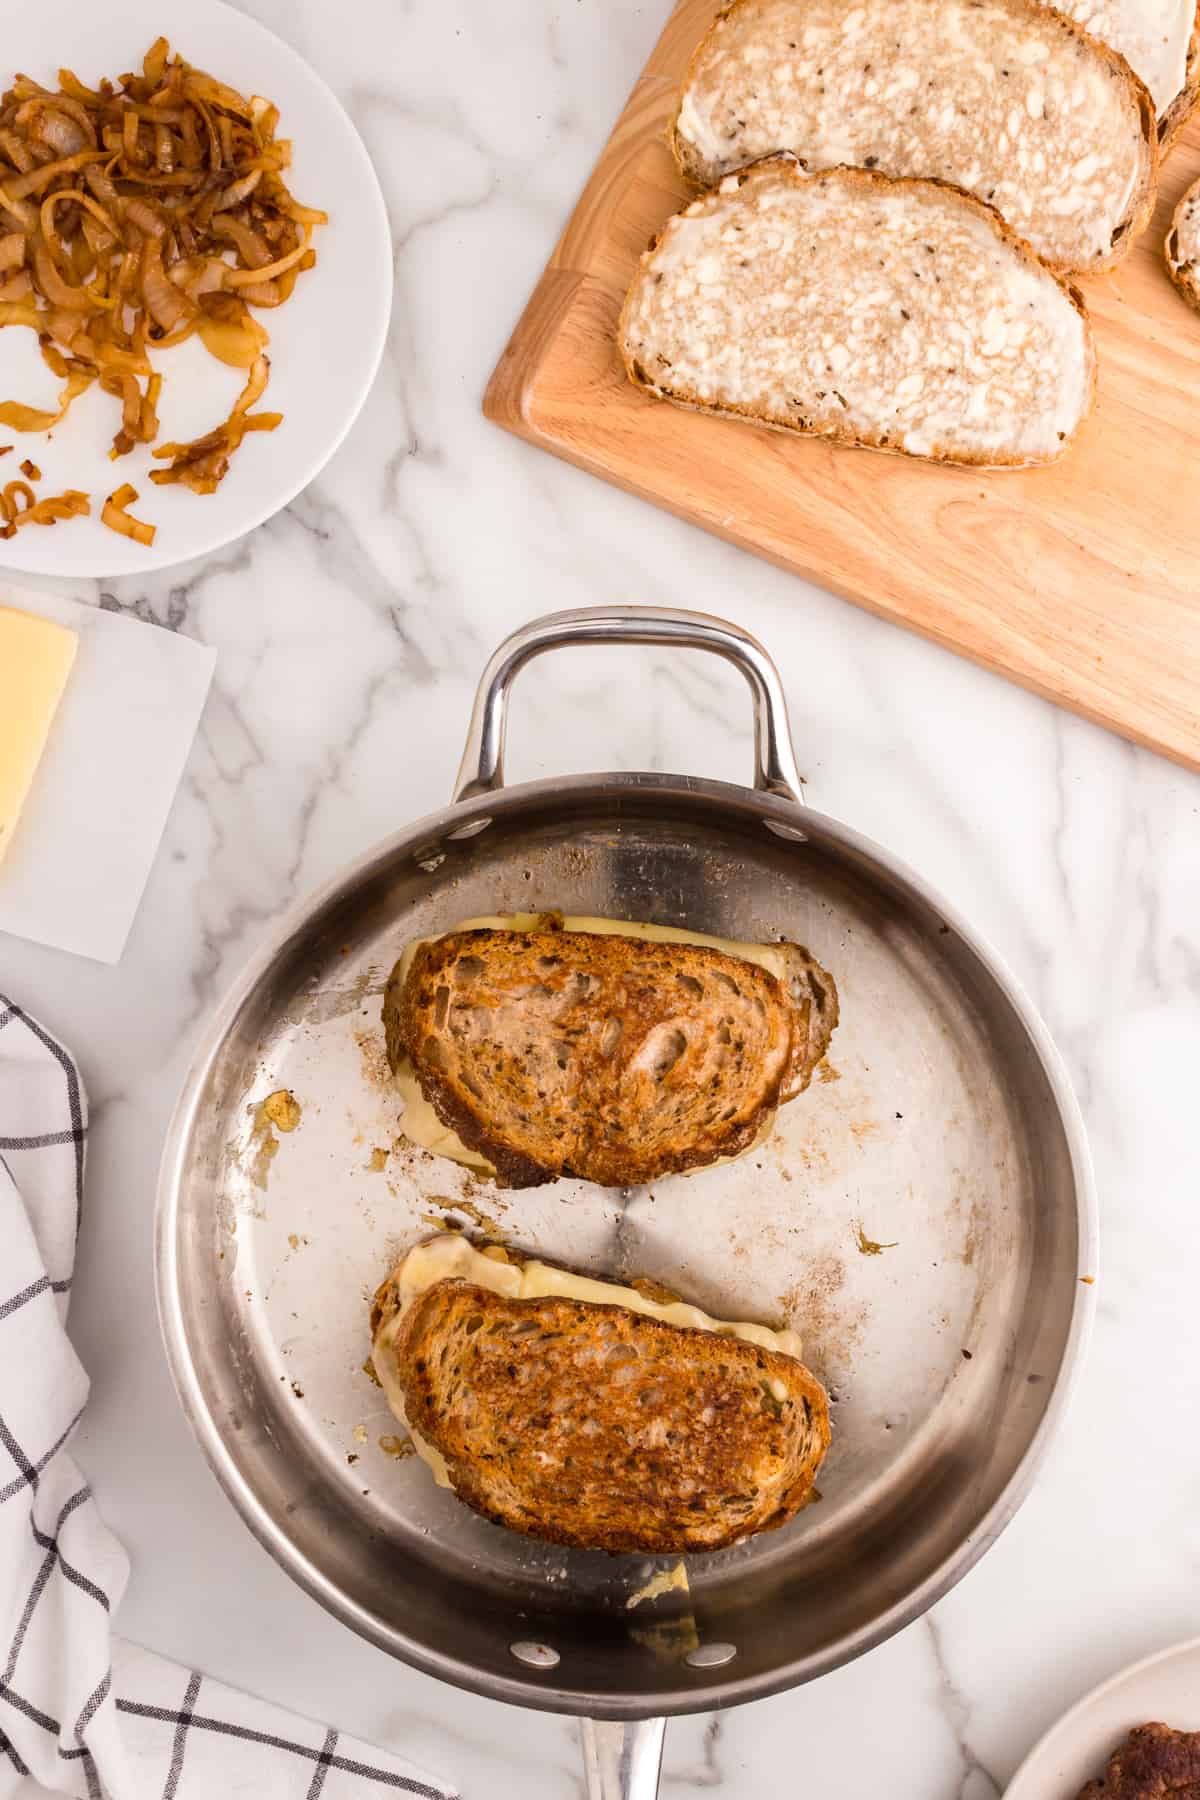 Perfectly browned rye bread loaded with Patty Melt ingredients